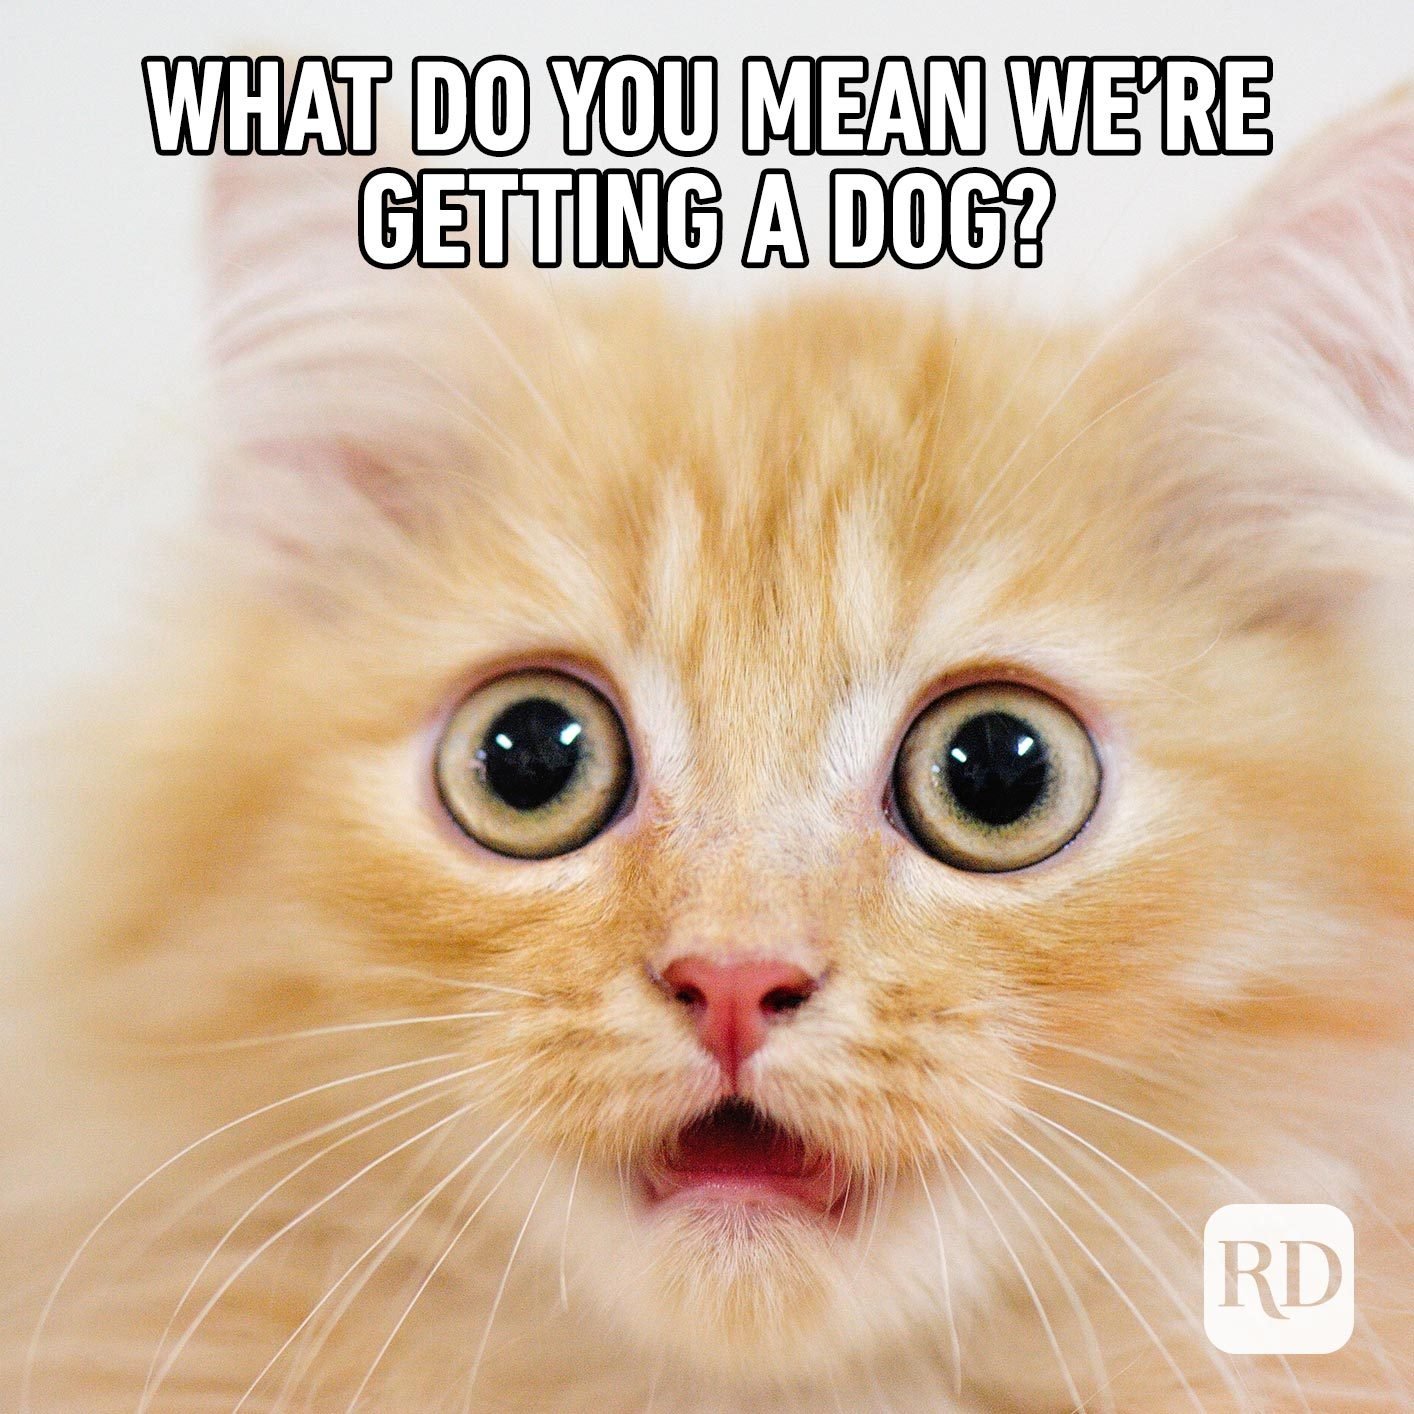 Terrified cat. Meme text: What do you mean we’re getting a dog?